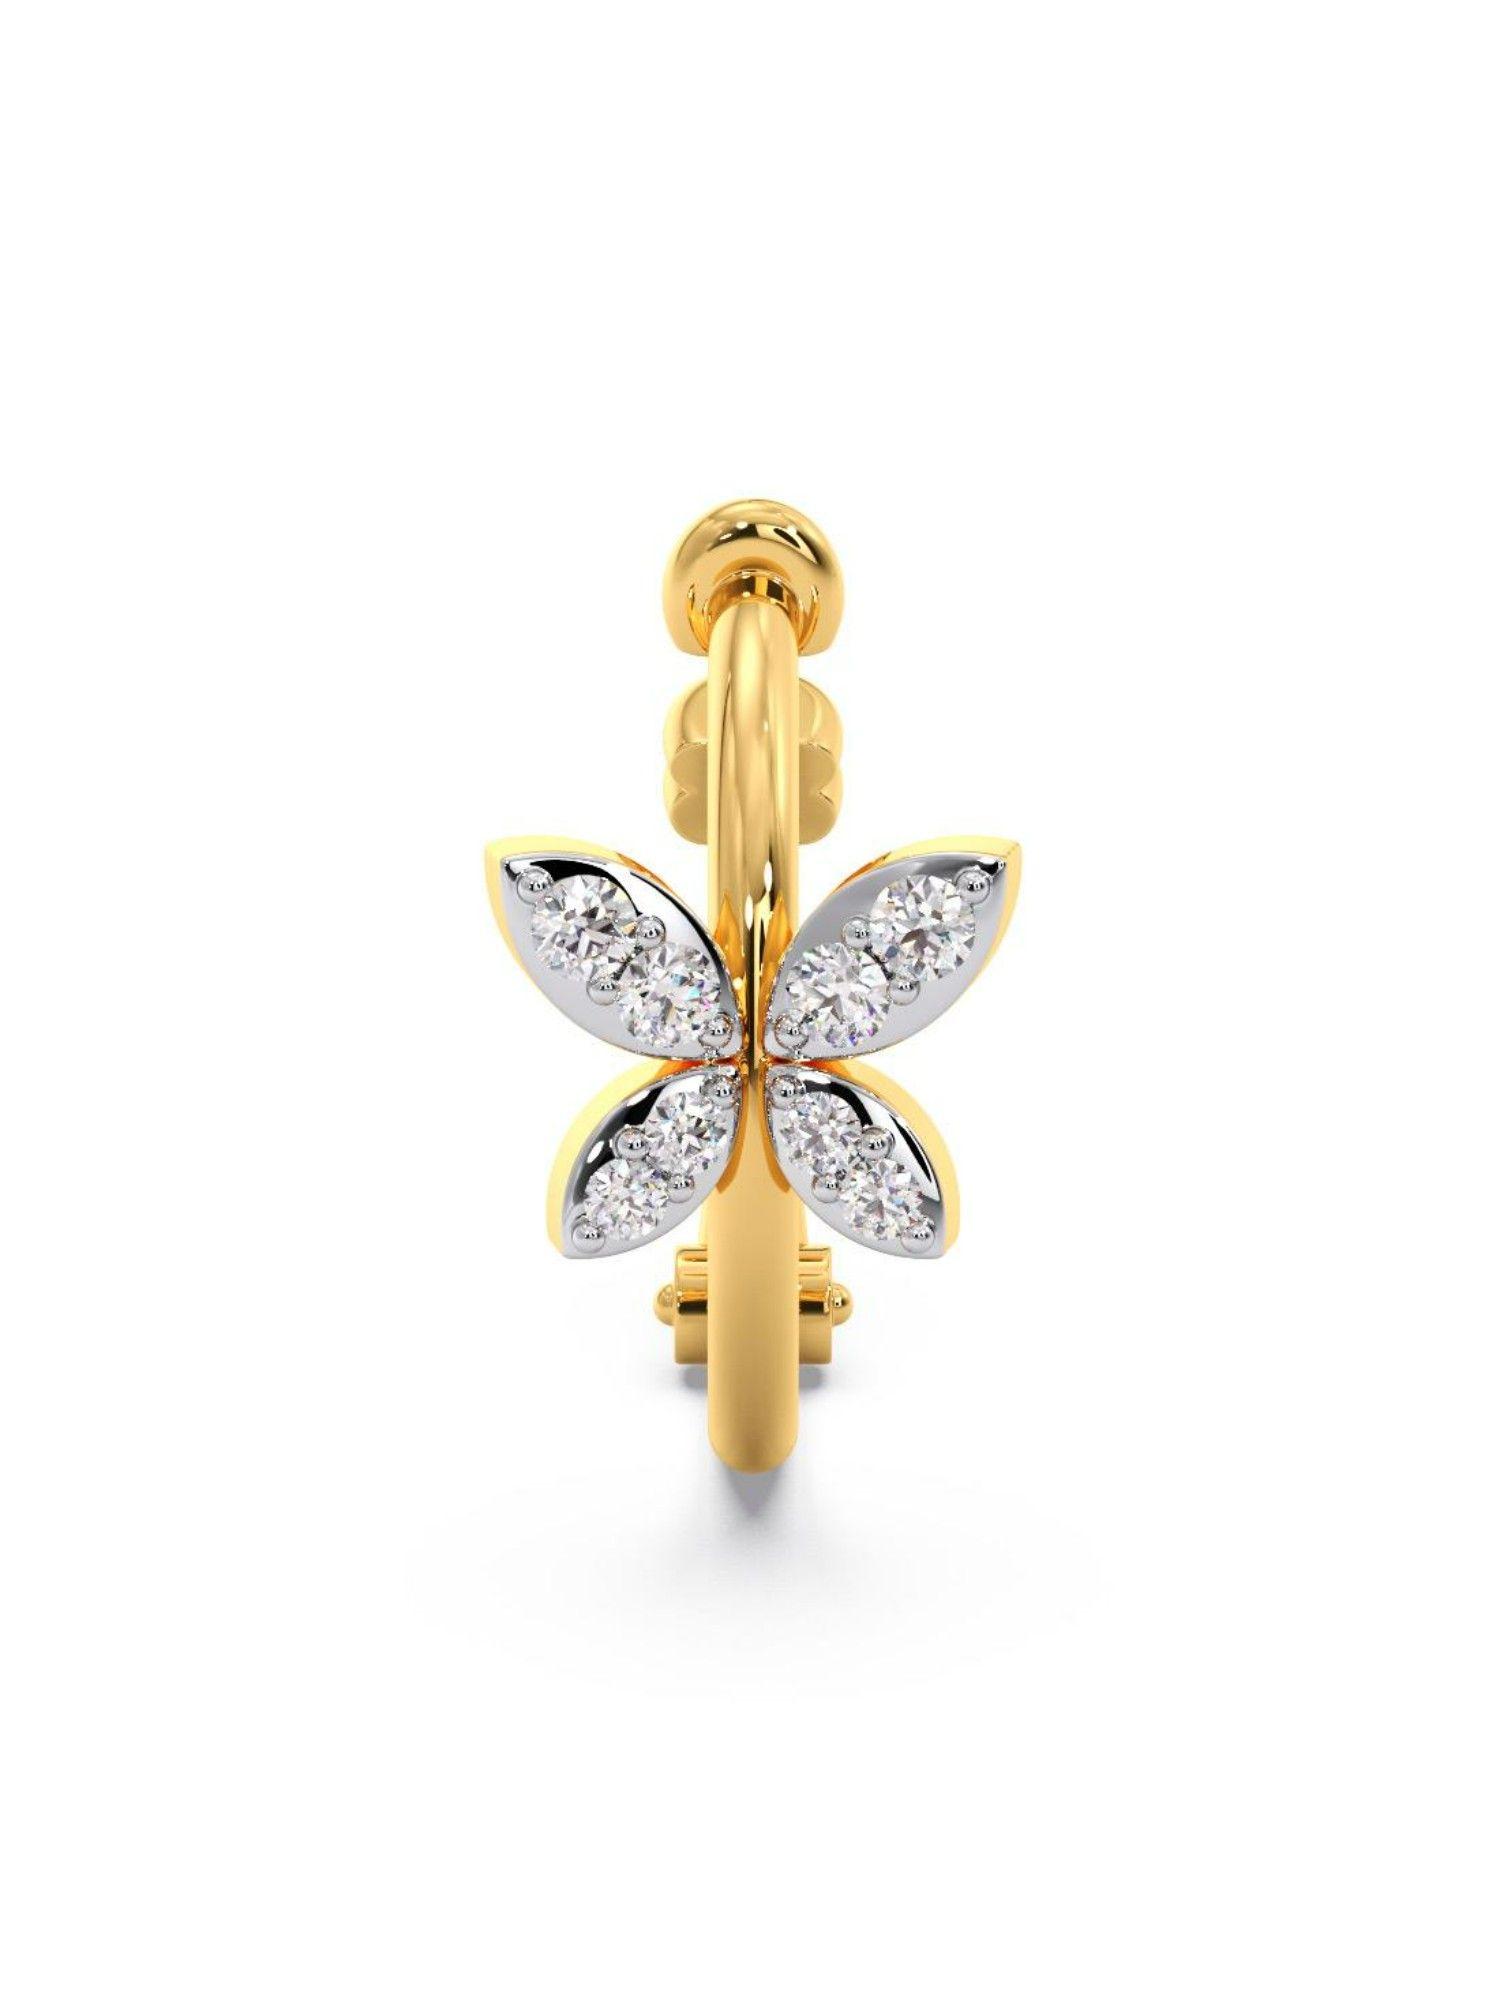 18k yellow gold bis hallmark and certified 8 diamond nose pin for women